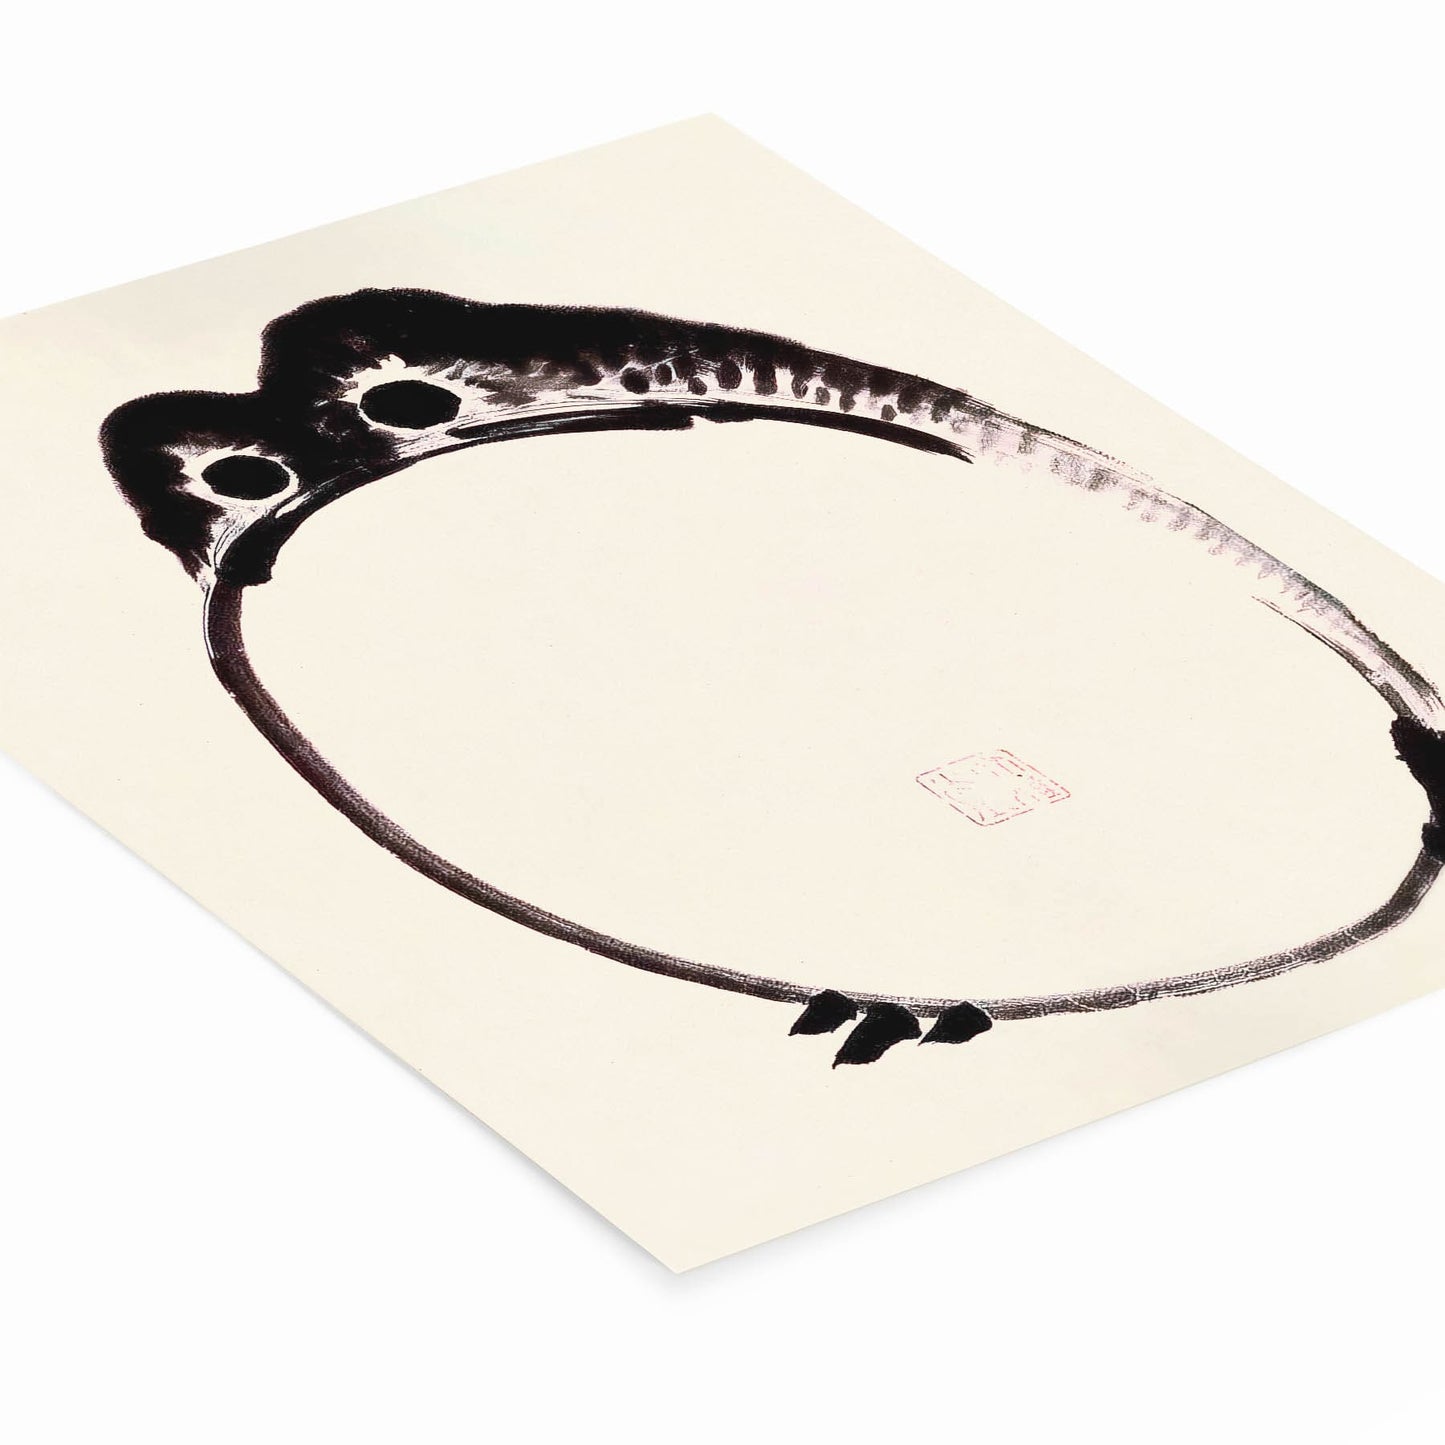 Funny Japanese Toad Art Print Laying Flat on a White Background